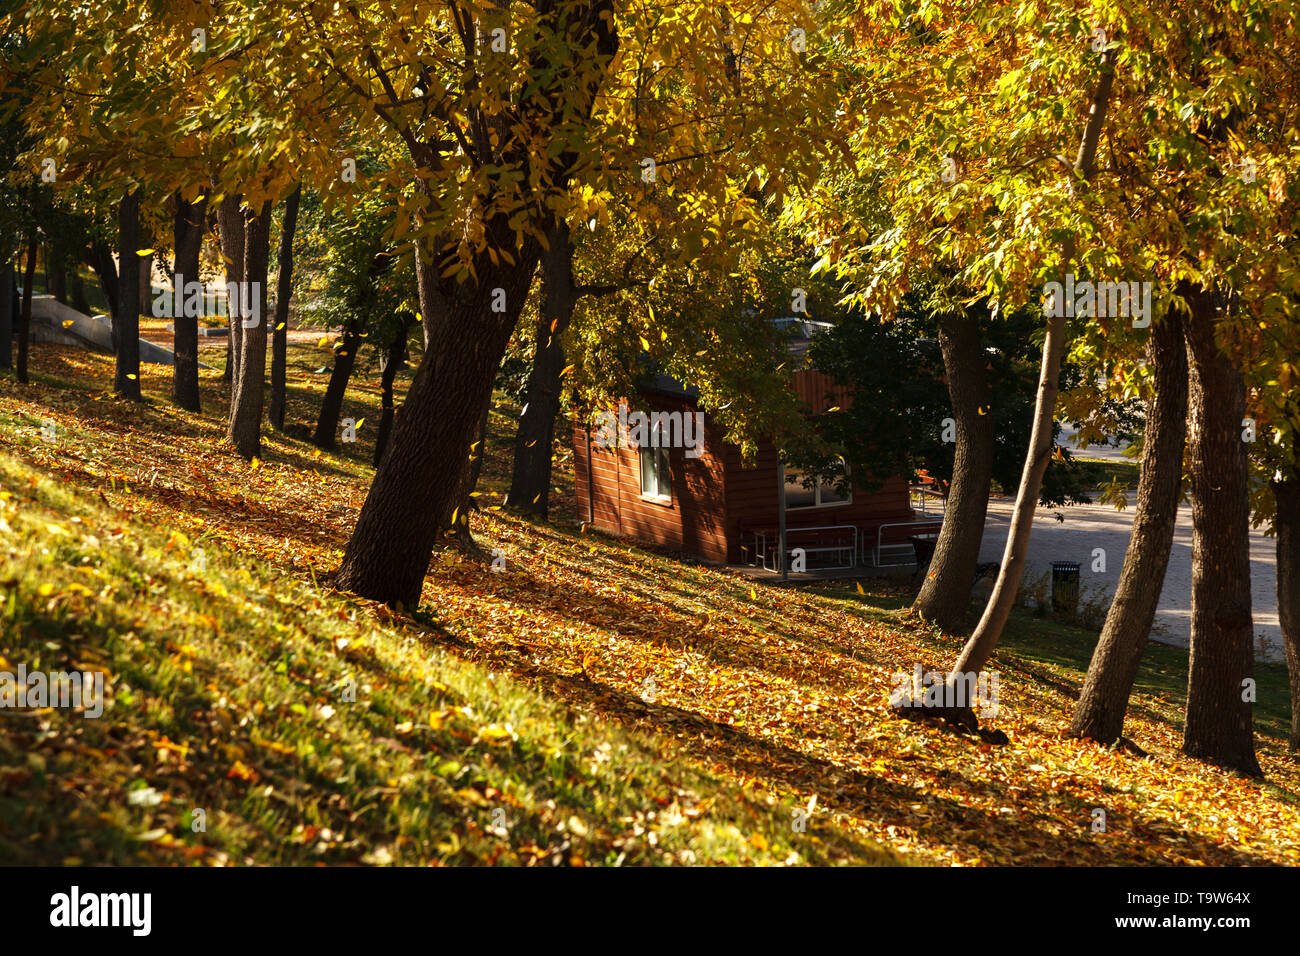 Autumn in good weather in the city Park. Fall, autumn landscape with trees full of colorful, falling leaves, small house in the background Stock Photo